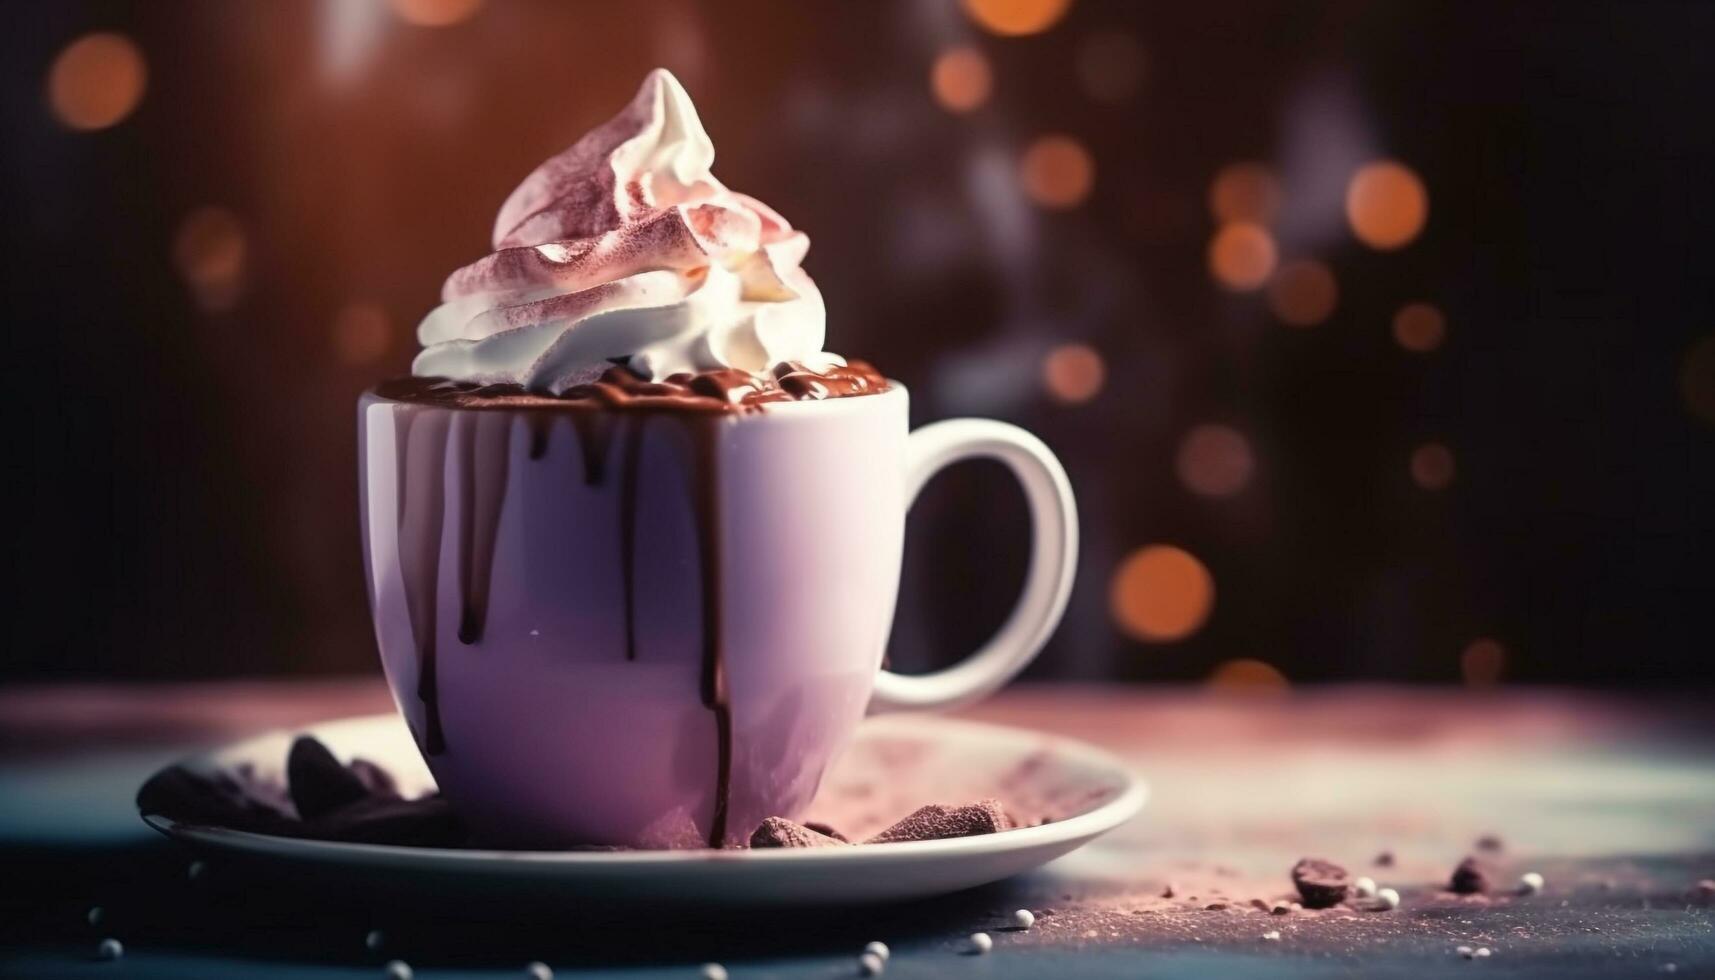 Whipped cream, chocolate, and marshmallow adorn frothy winter drinks generated by AI photo